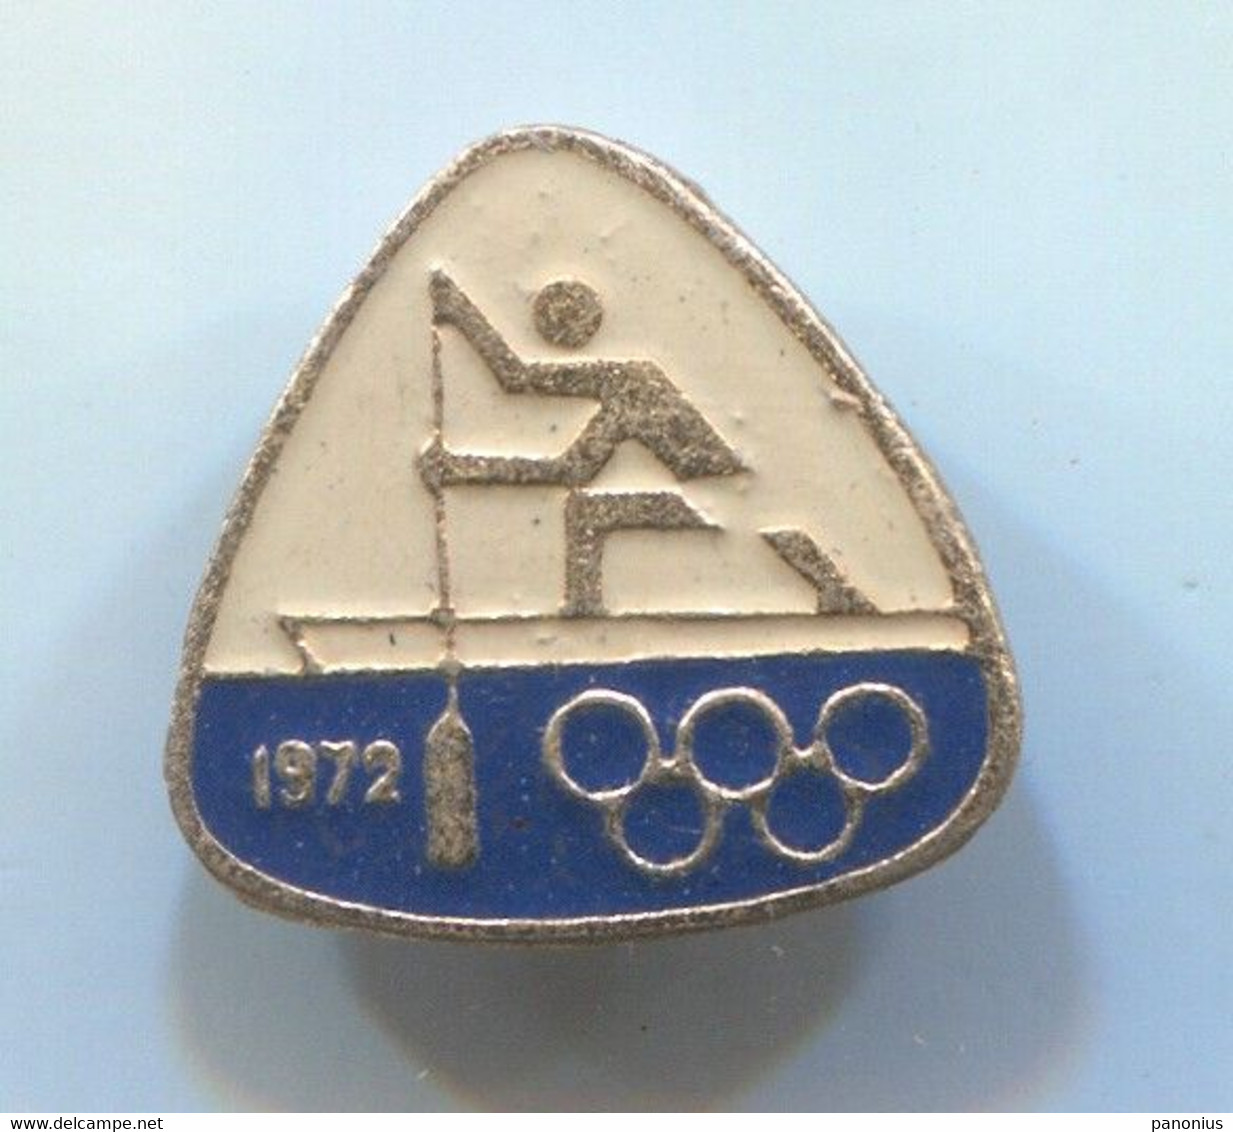 ROWING CANOE KAYAK - OLYMPIADE MUNCHEN 1972. RUSSIAN VINTAGE PIN, BADGE, ABZEICHEN - Rowing